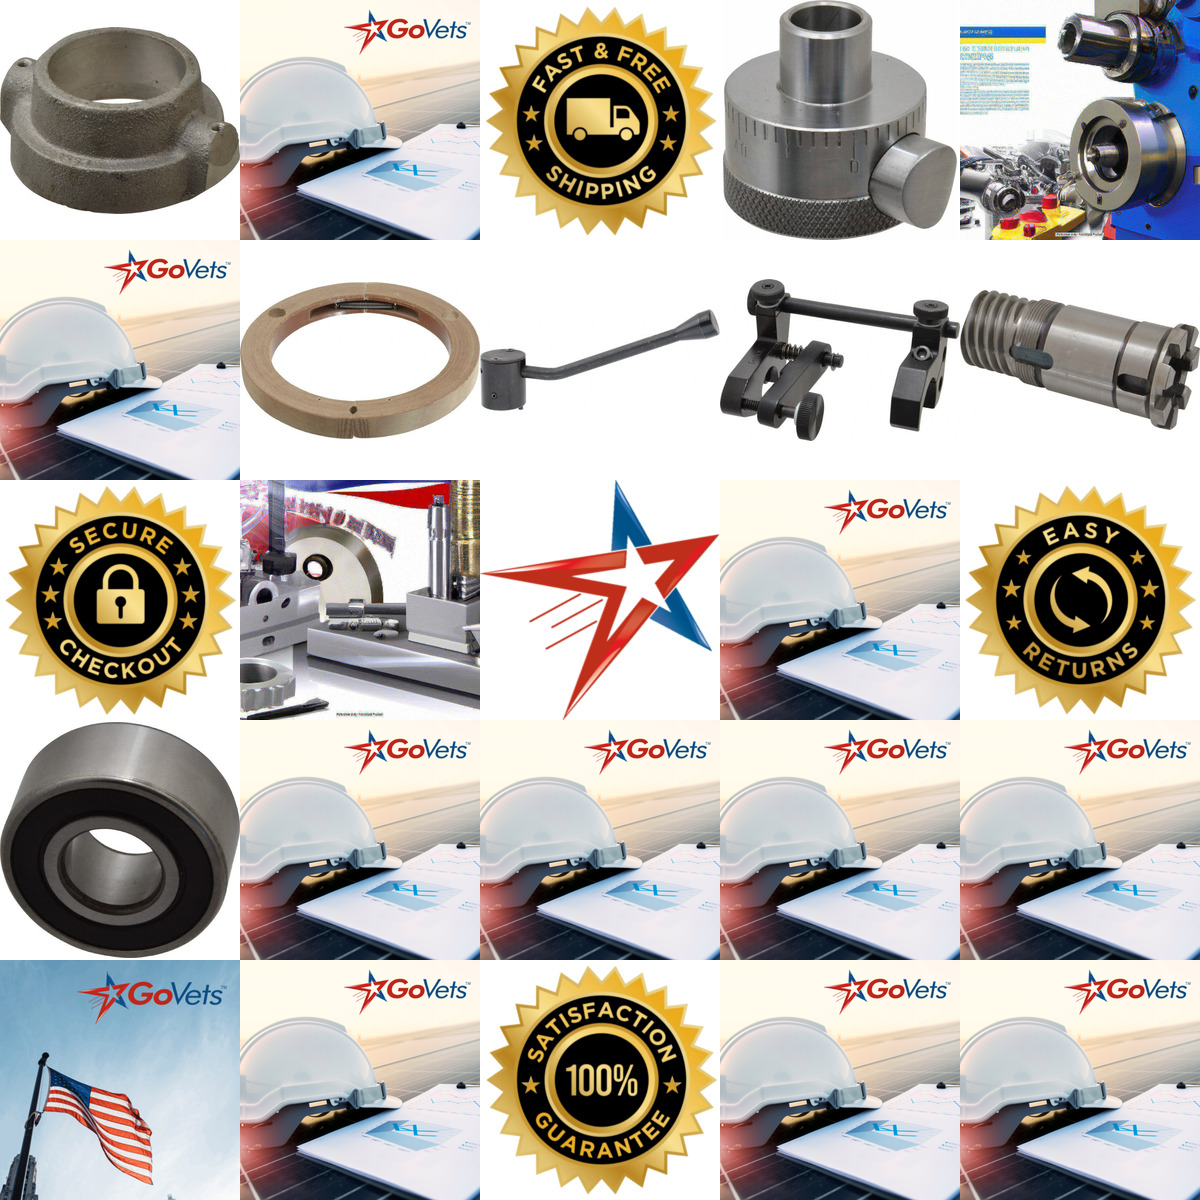 A selection of Milling Machine Parts and Hardware products on GoVets